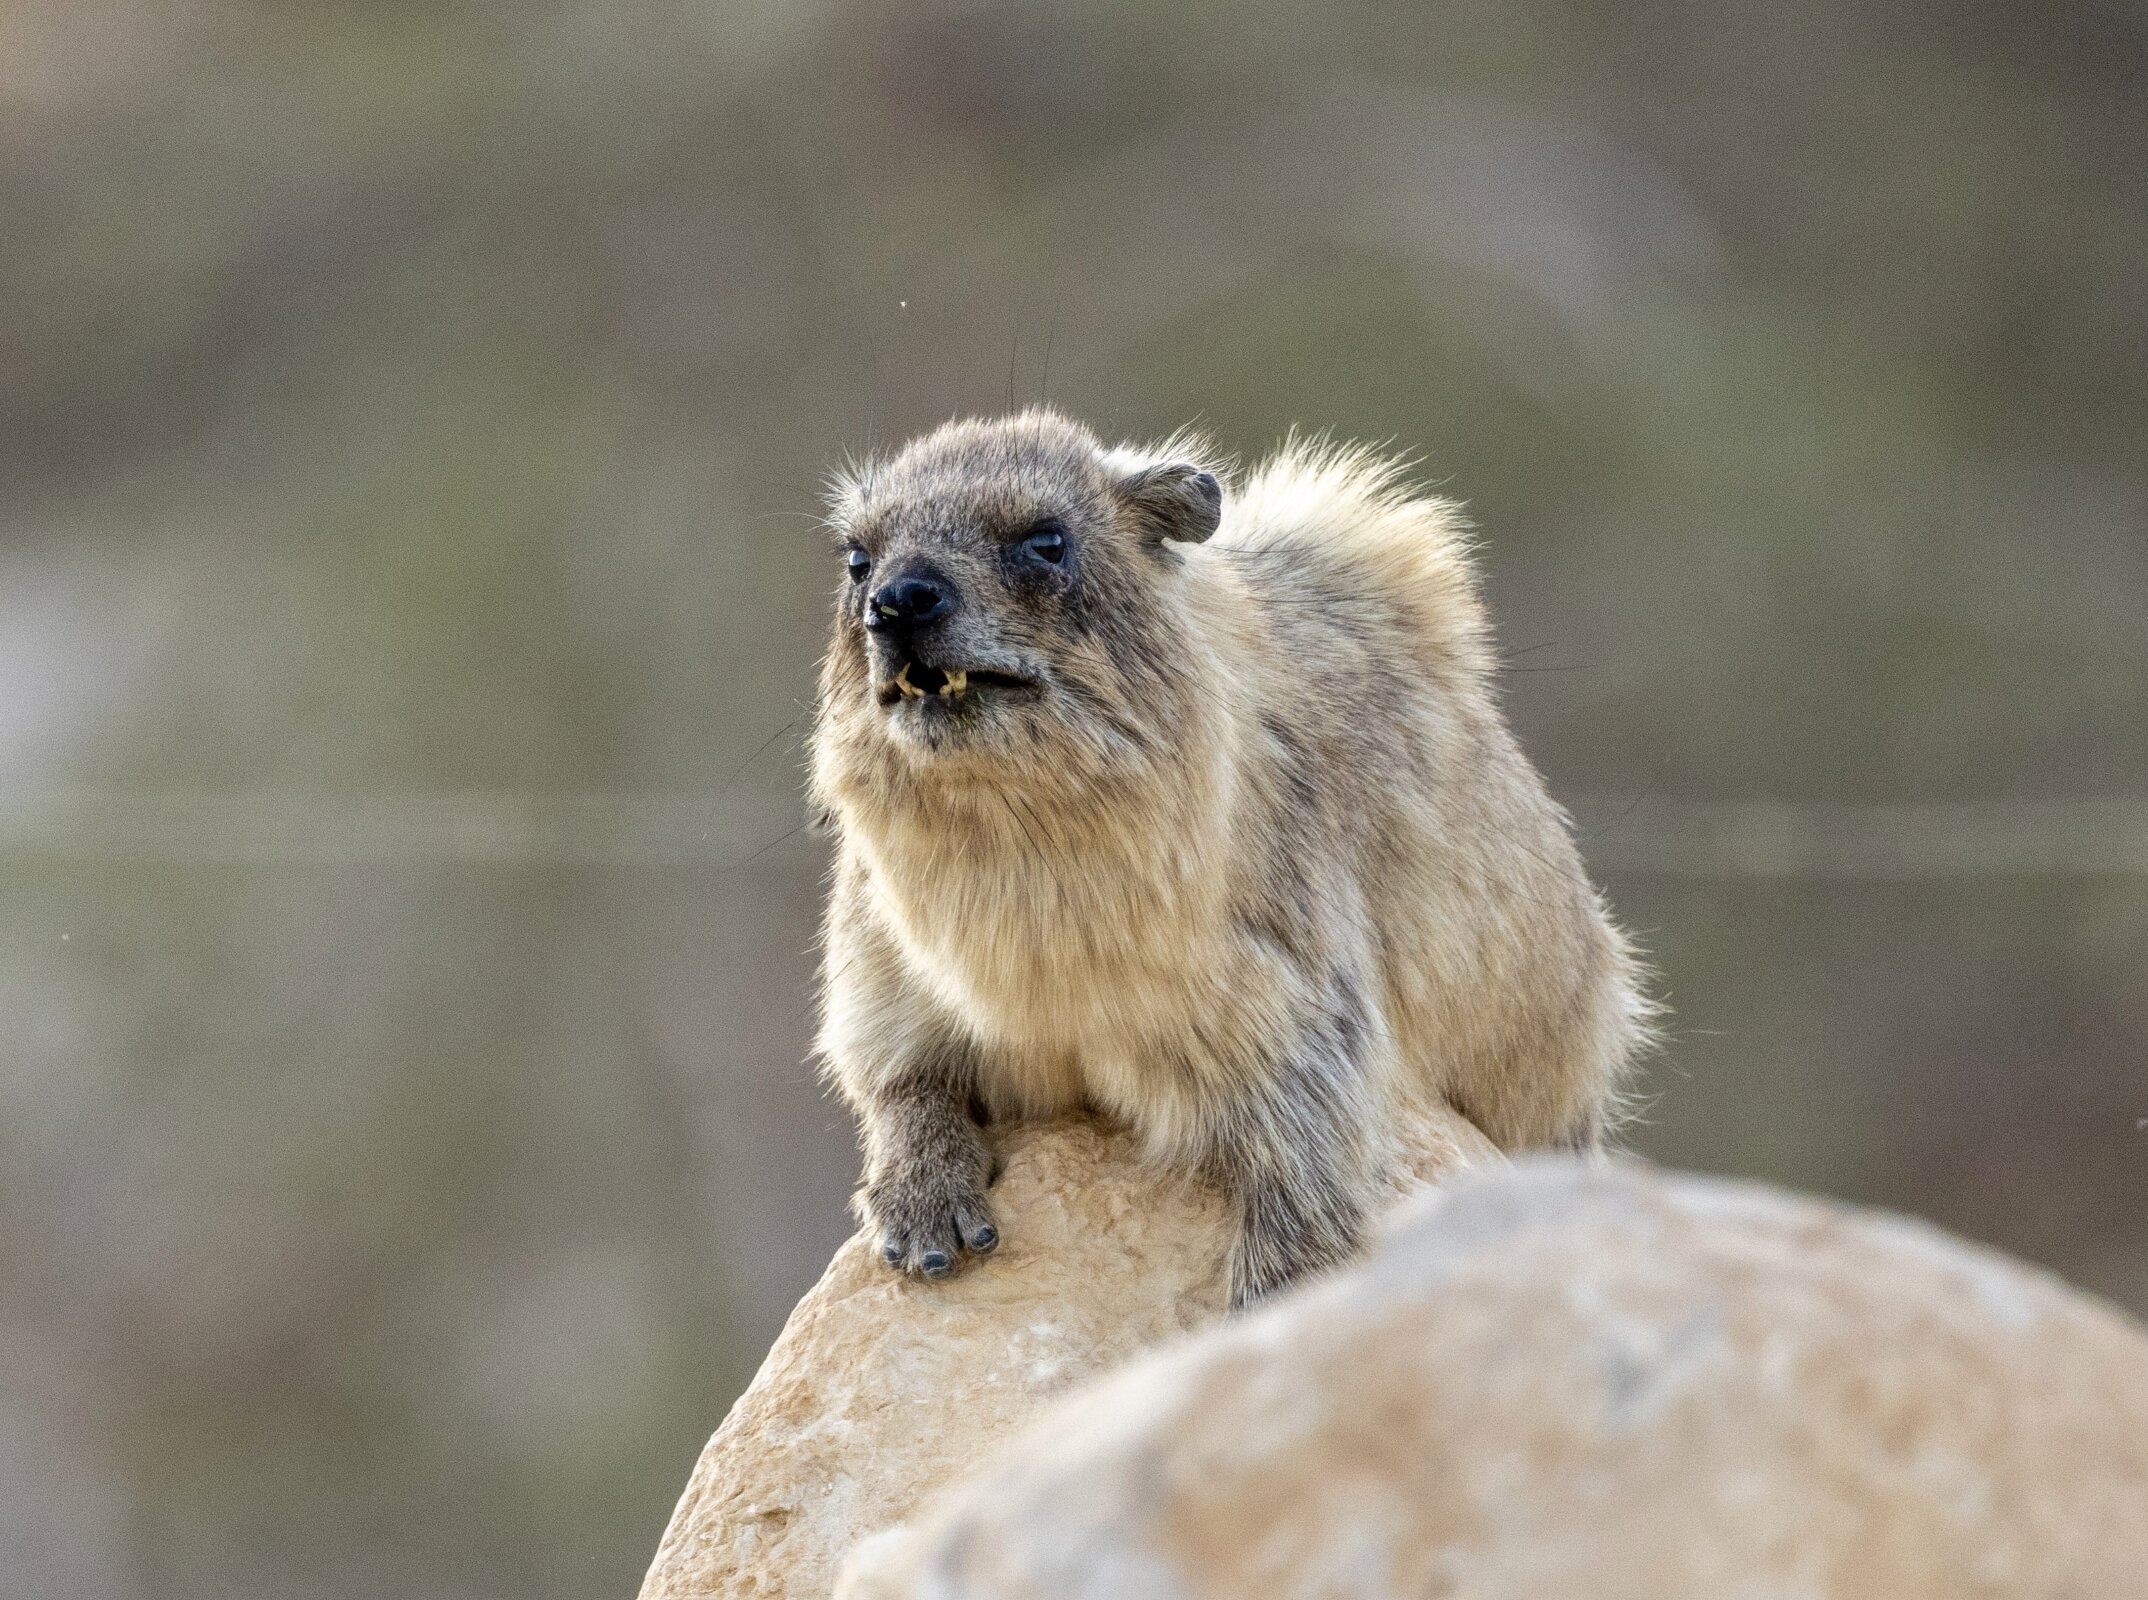 #Keeping to a beat is linked to reproductive success in male rock hyraxes